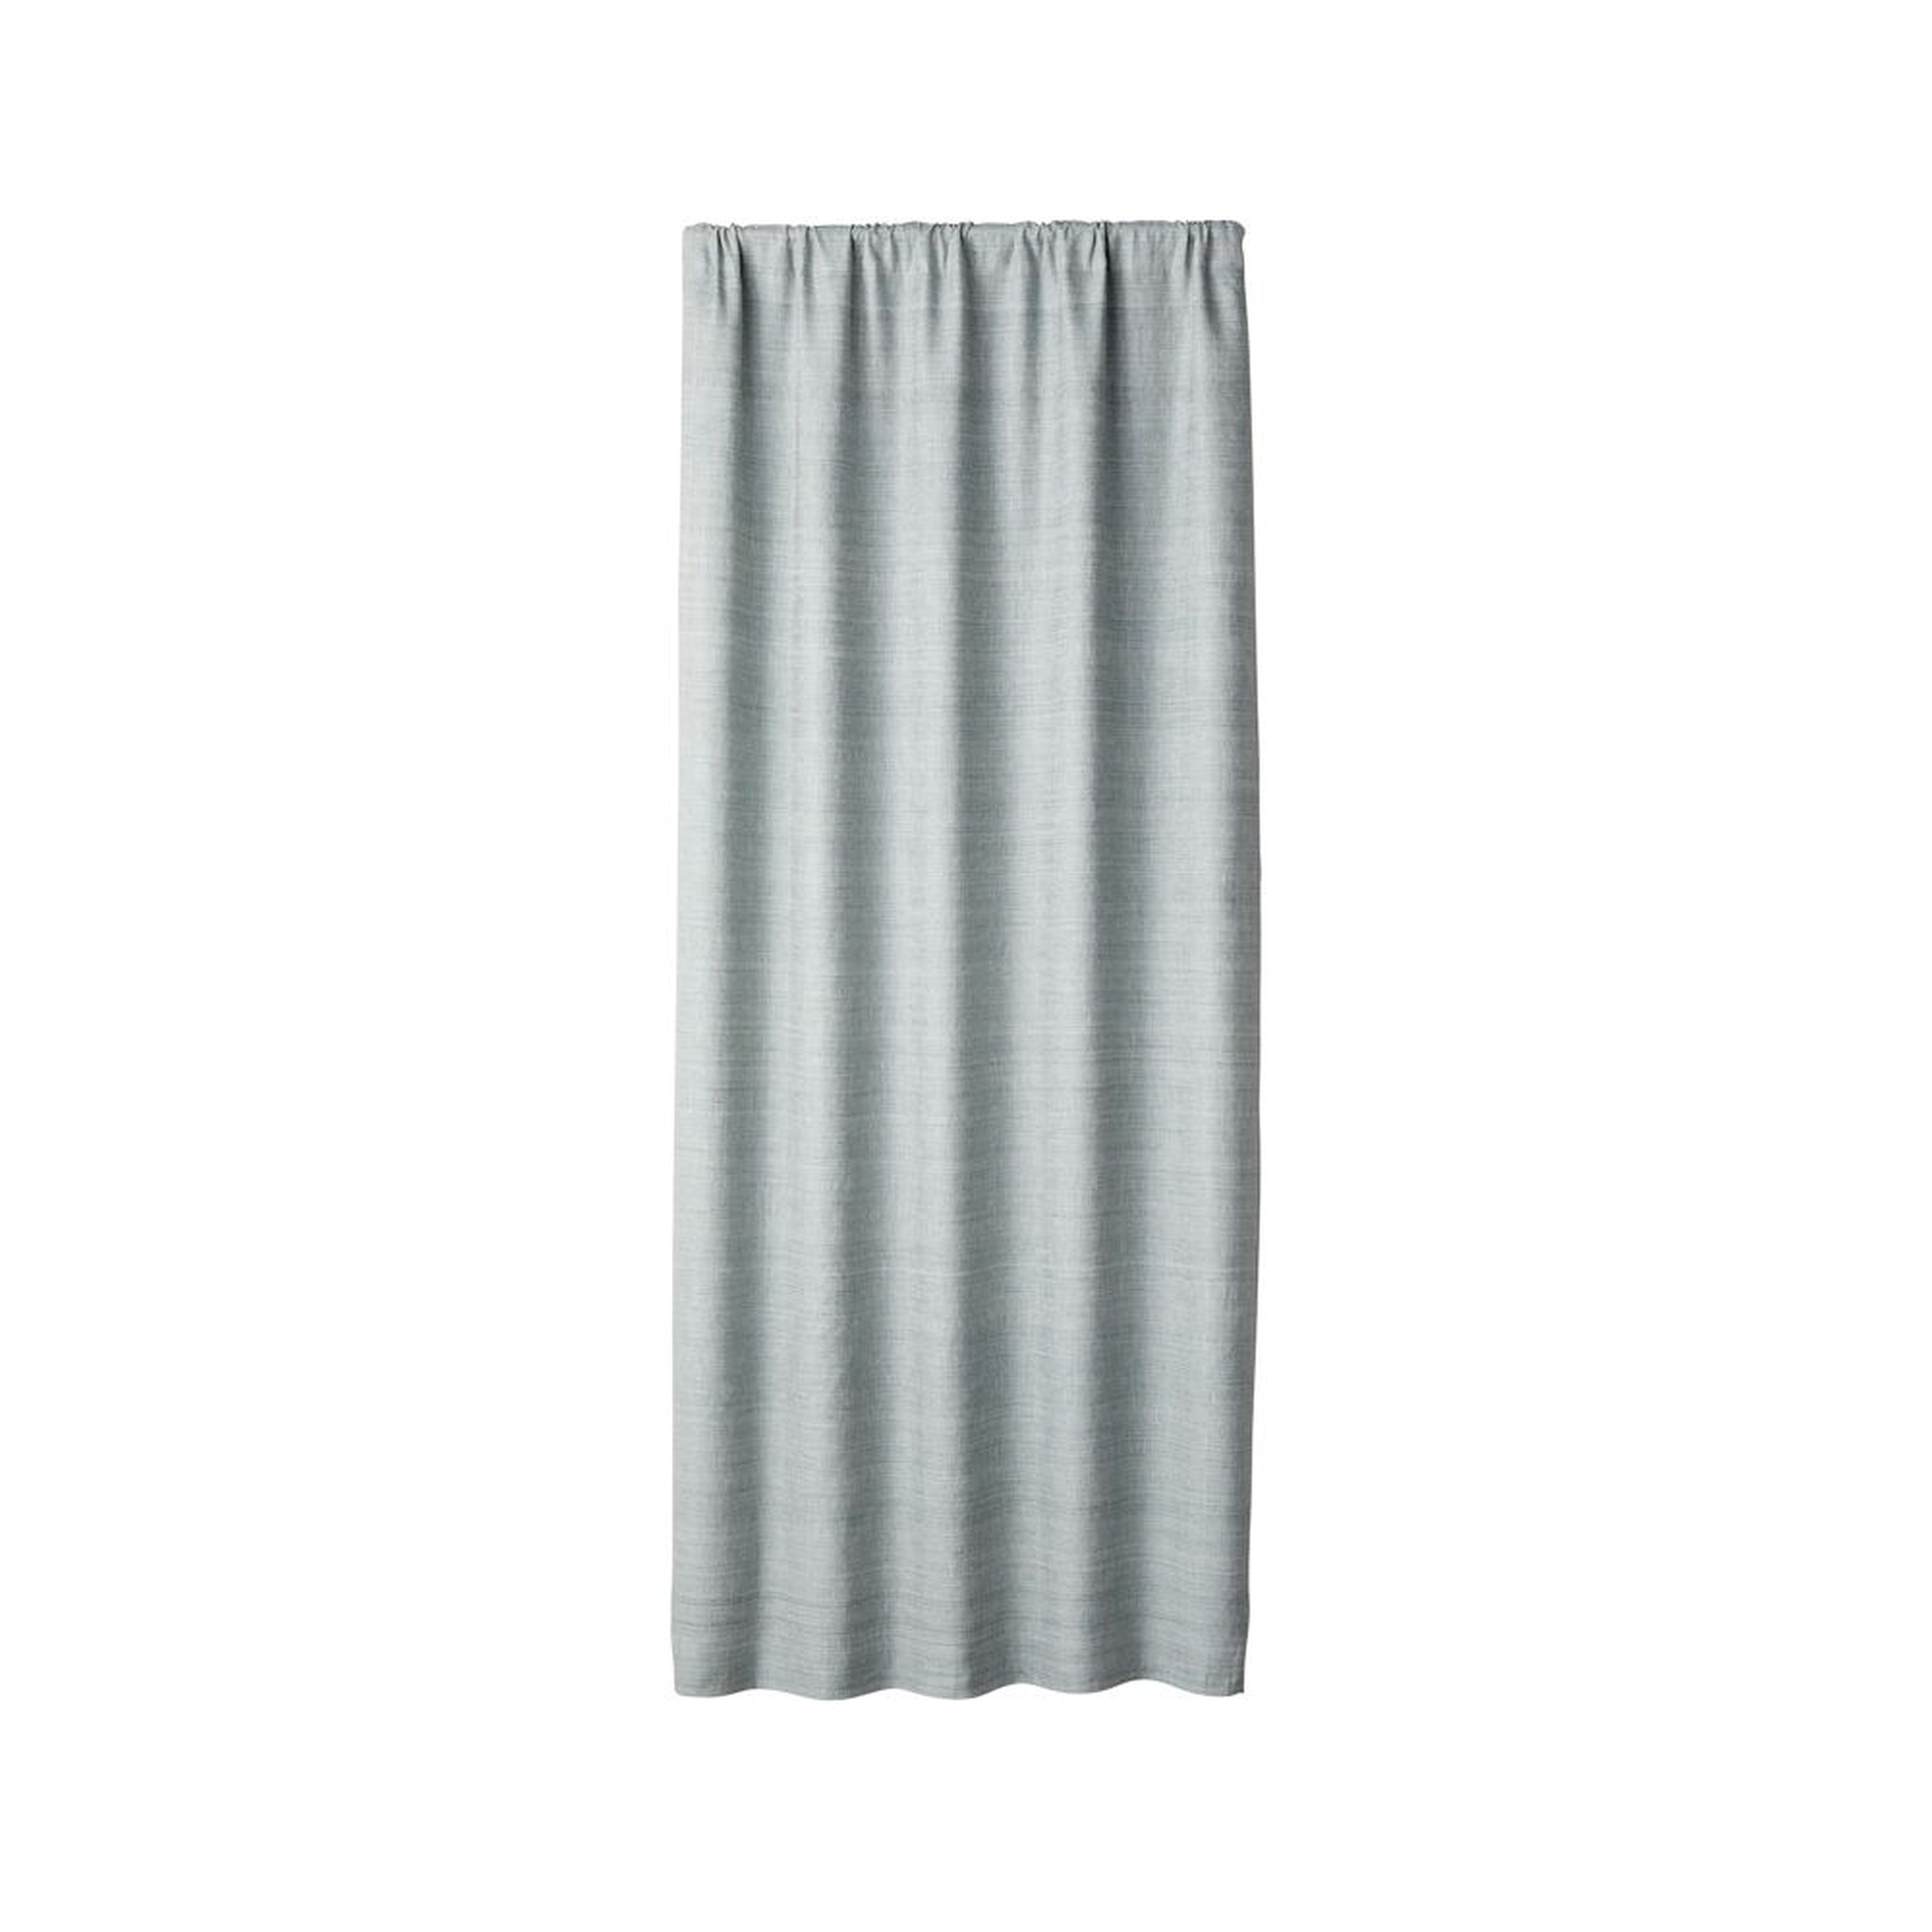 Silvana Silk Abyss Blackout Curtain Panel 48"x84" - Crate and Barrel